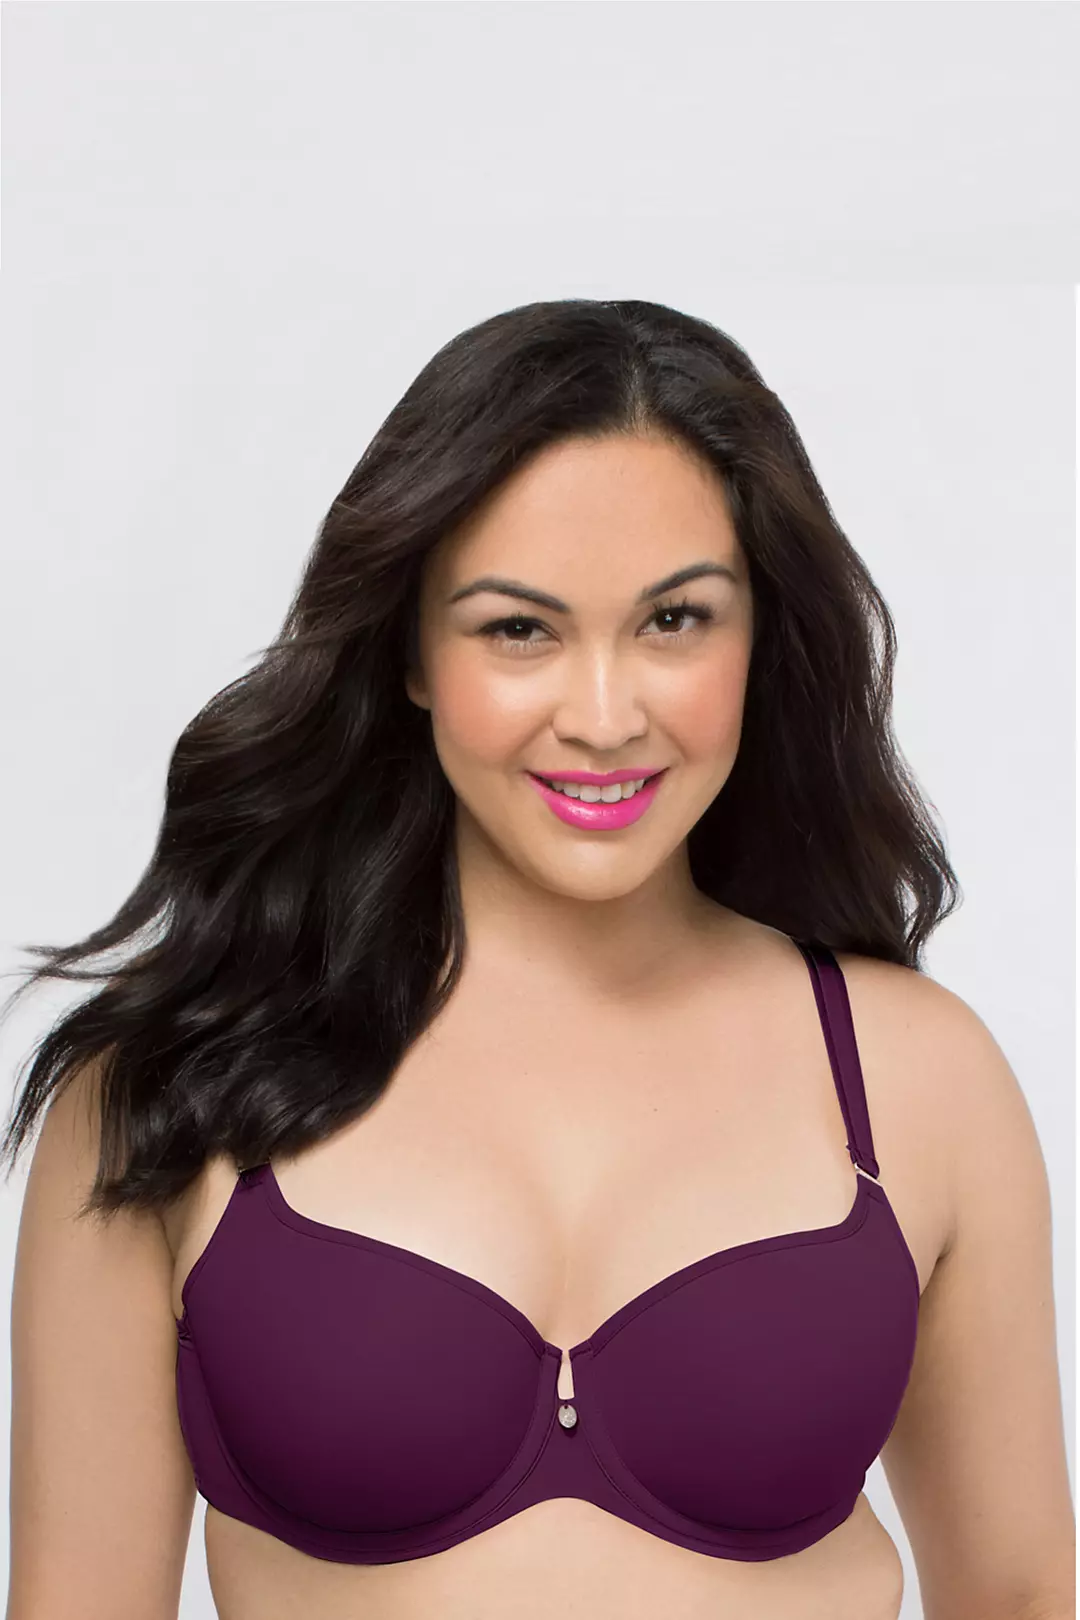 Curvy Couture Tulip Smooth T-Shirt Bra 1274